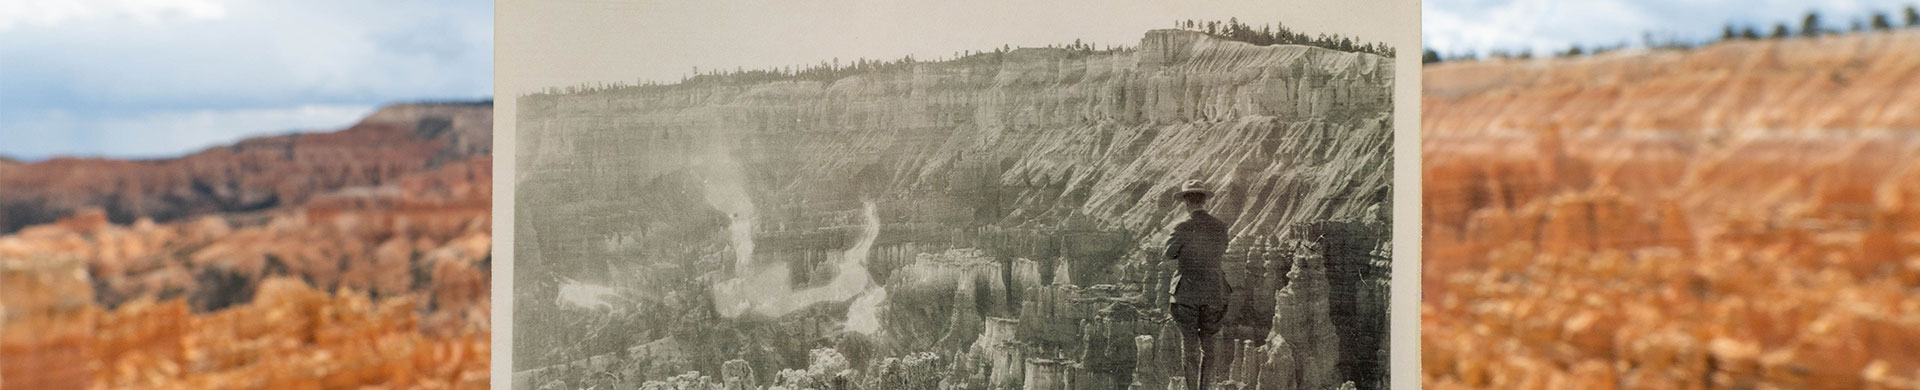 Black and White Photo of Bryce Canyon overlayed on present day color photo 